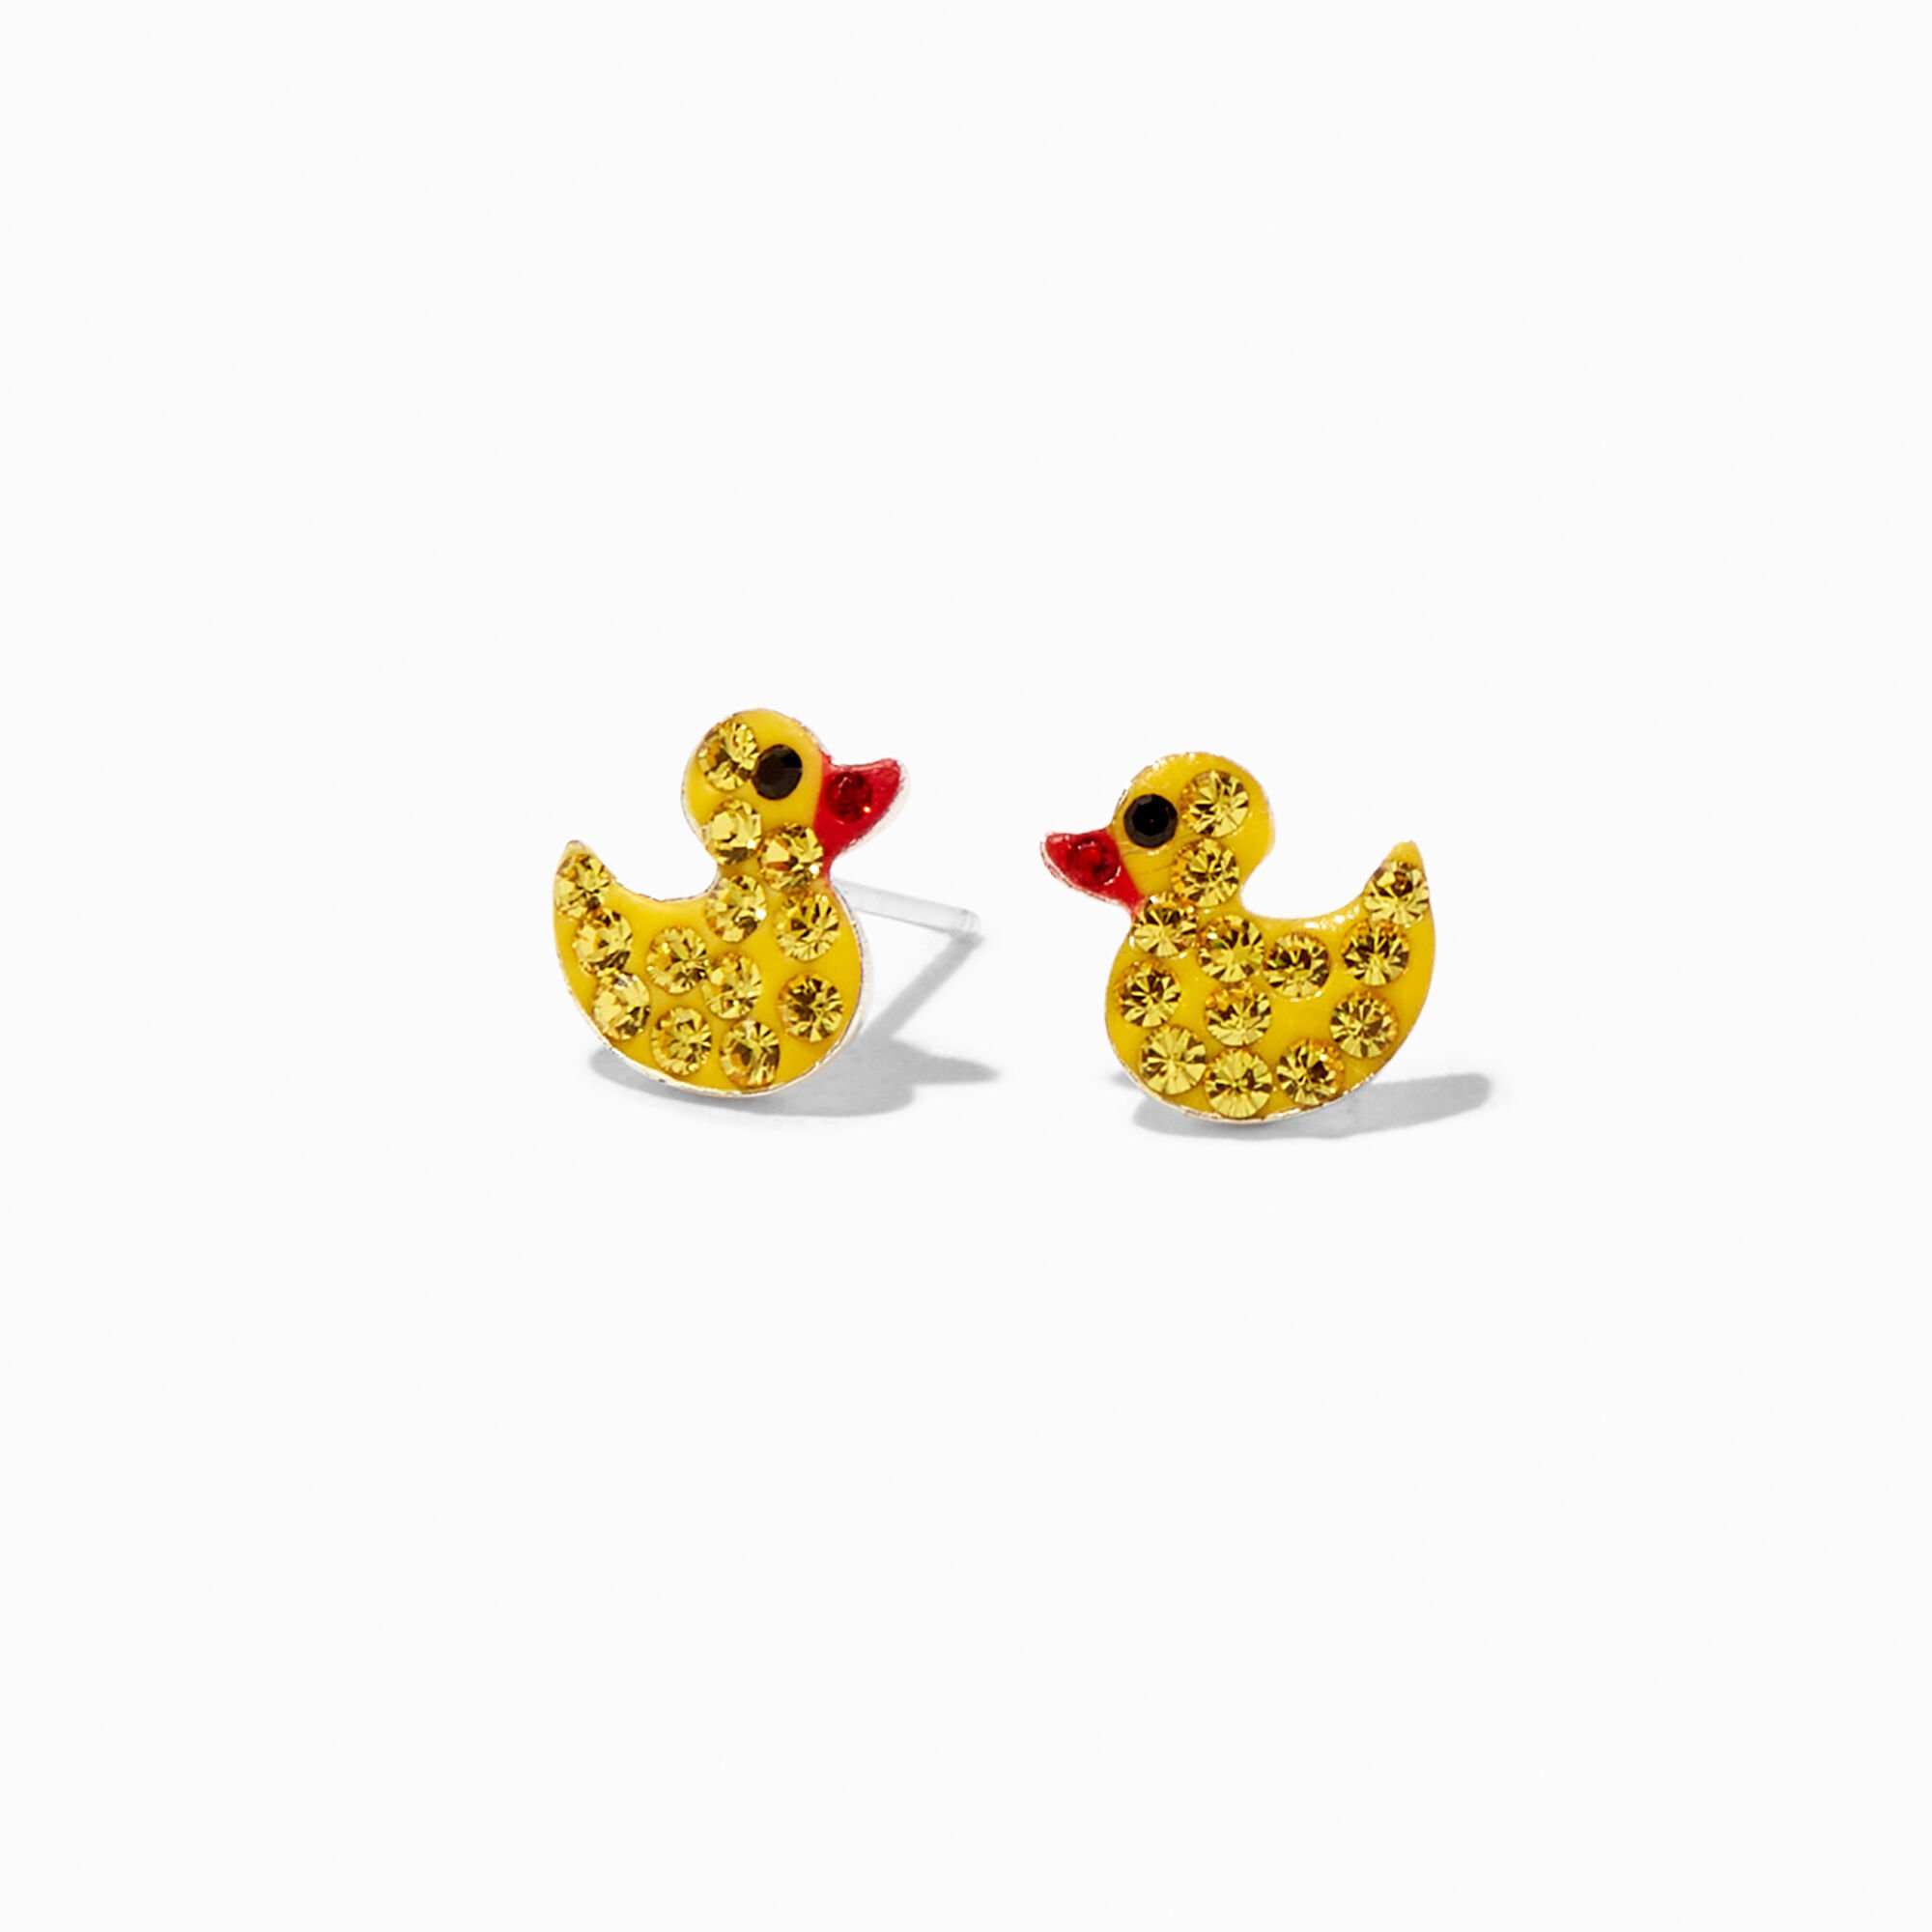 View Claires Crystal Rubber Ducky Stud Earrings Silver information